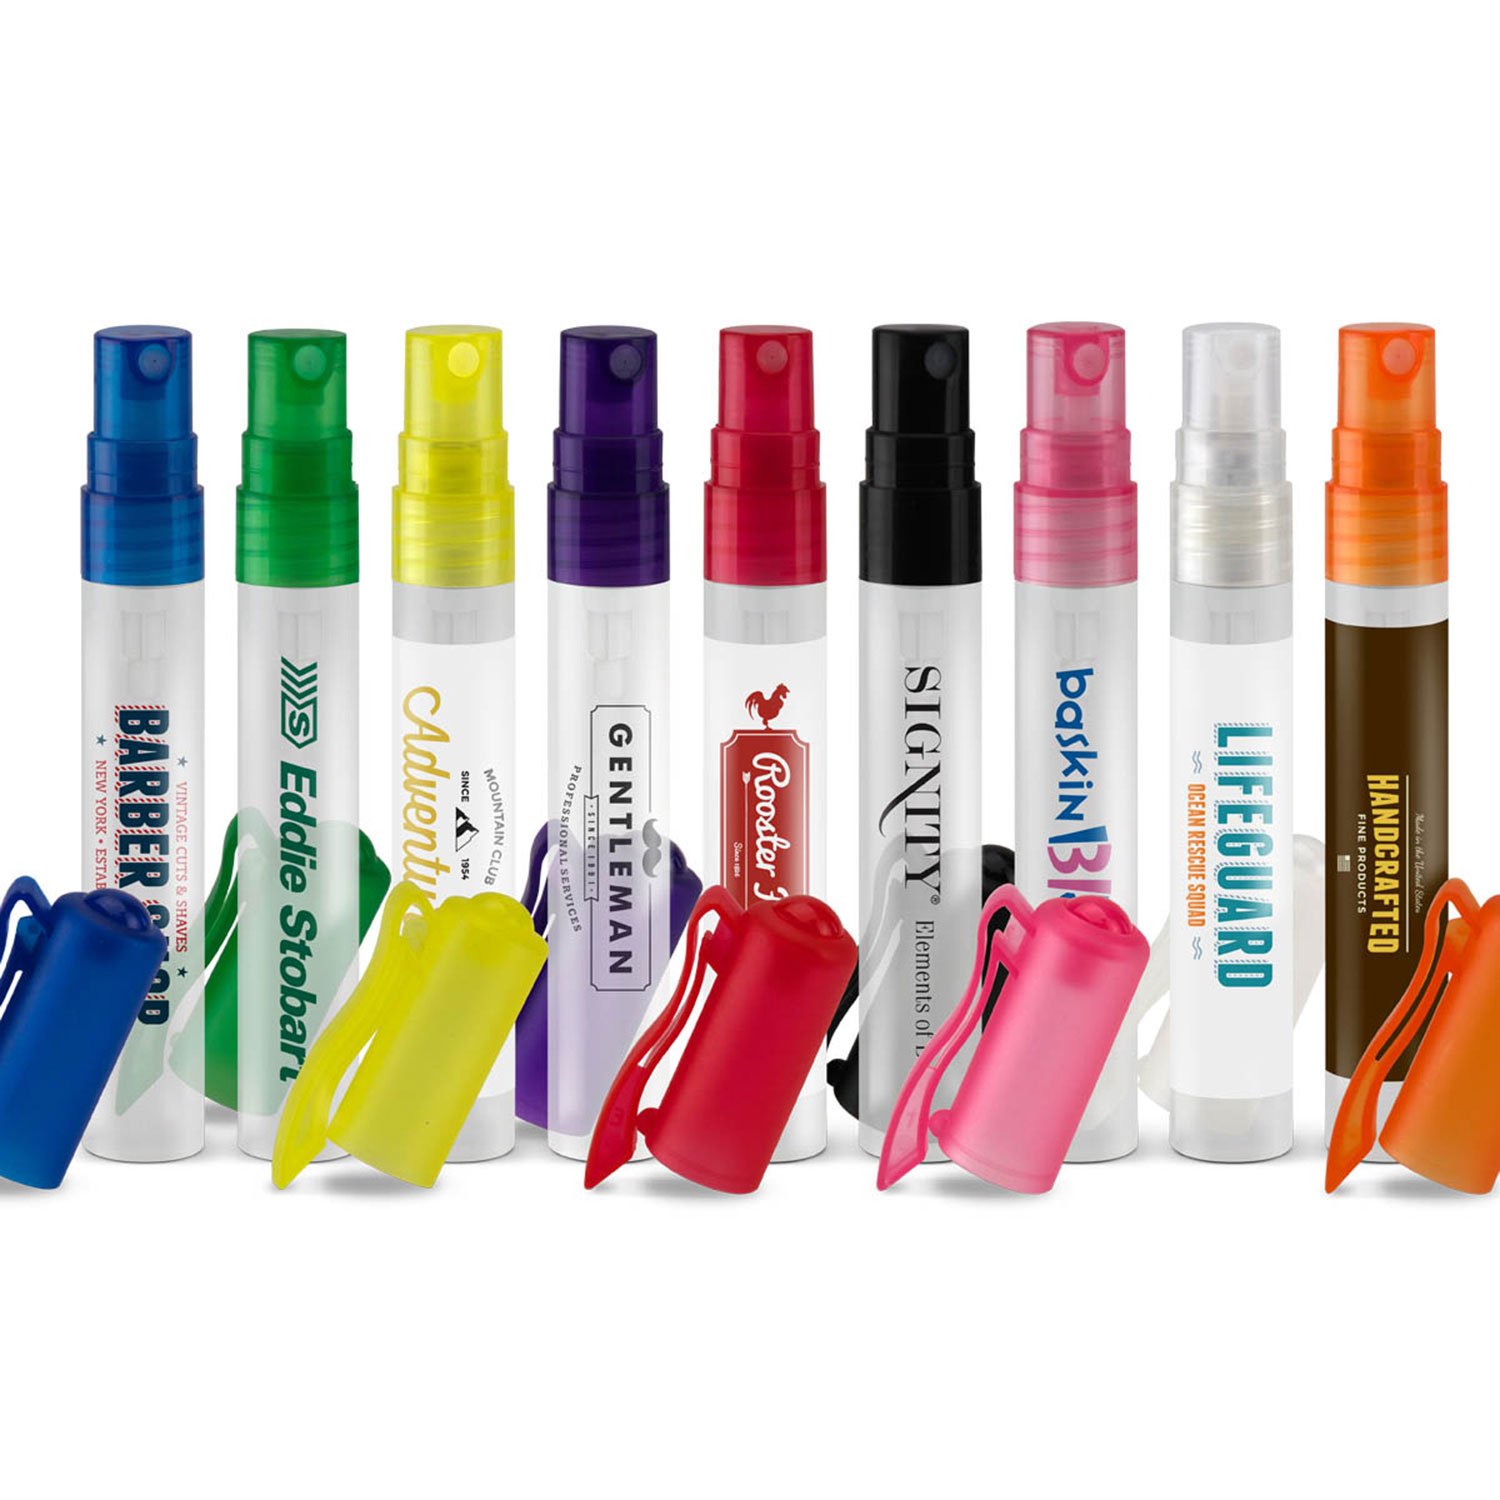 Hand Sanitizer Pen Sprayer With Alcohol